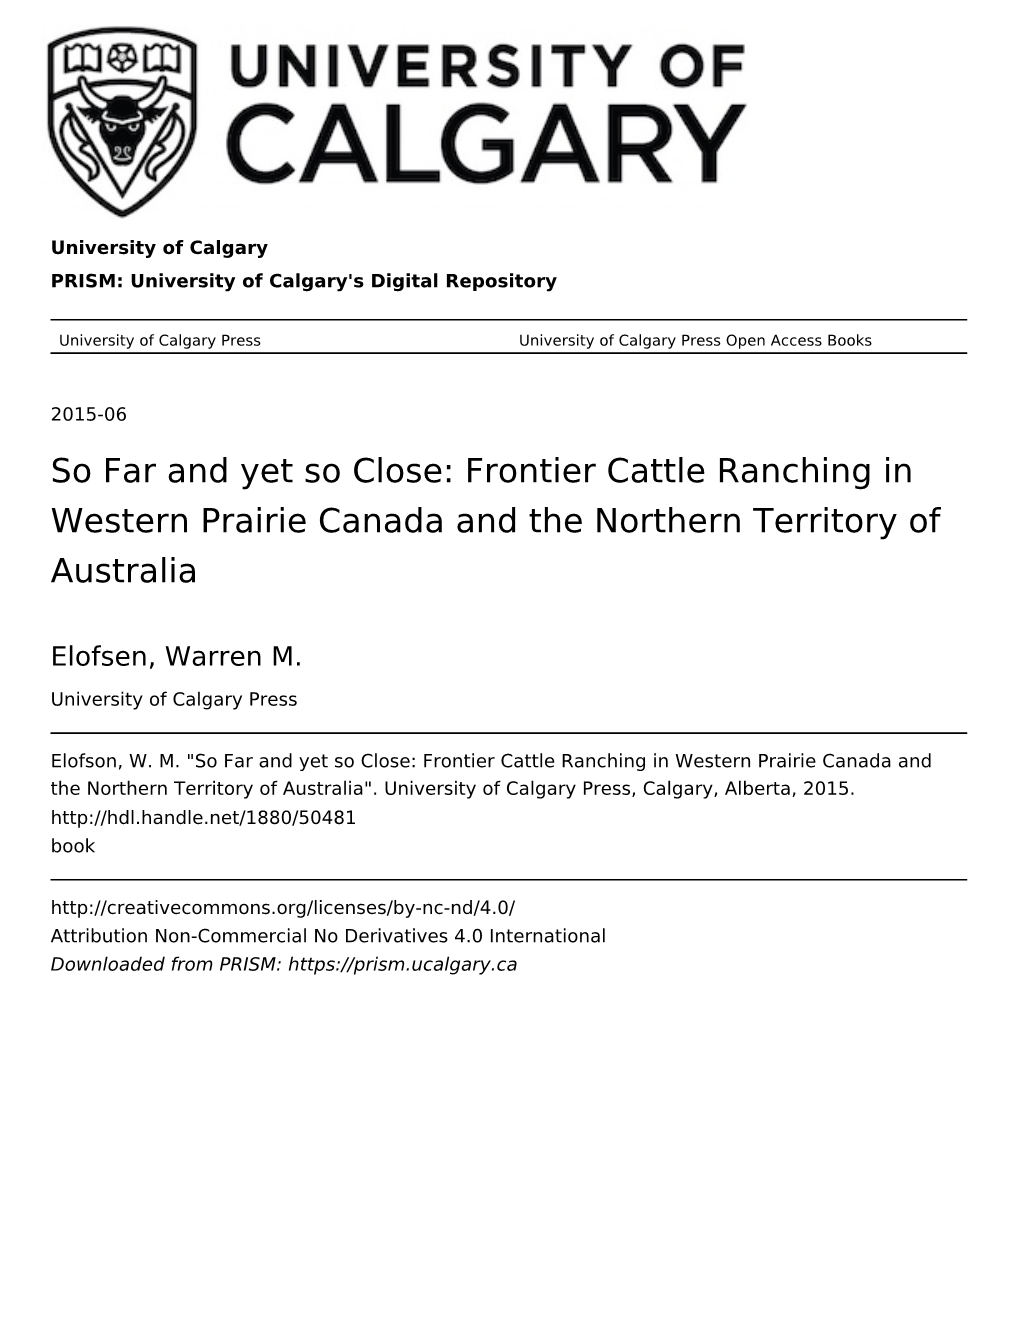 So Far and Yet So Close: Frontier Cattle Ranching in Western Prairie Canada and the Northern Territory of Australia